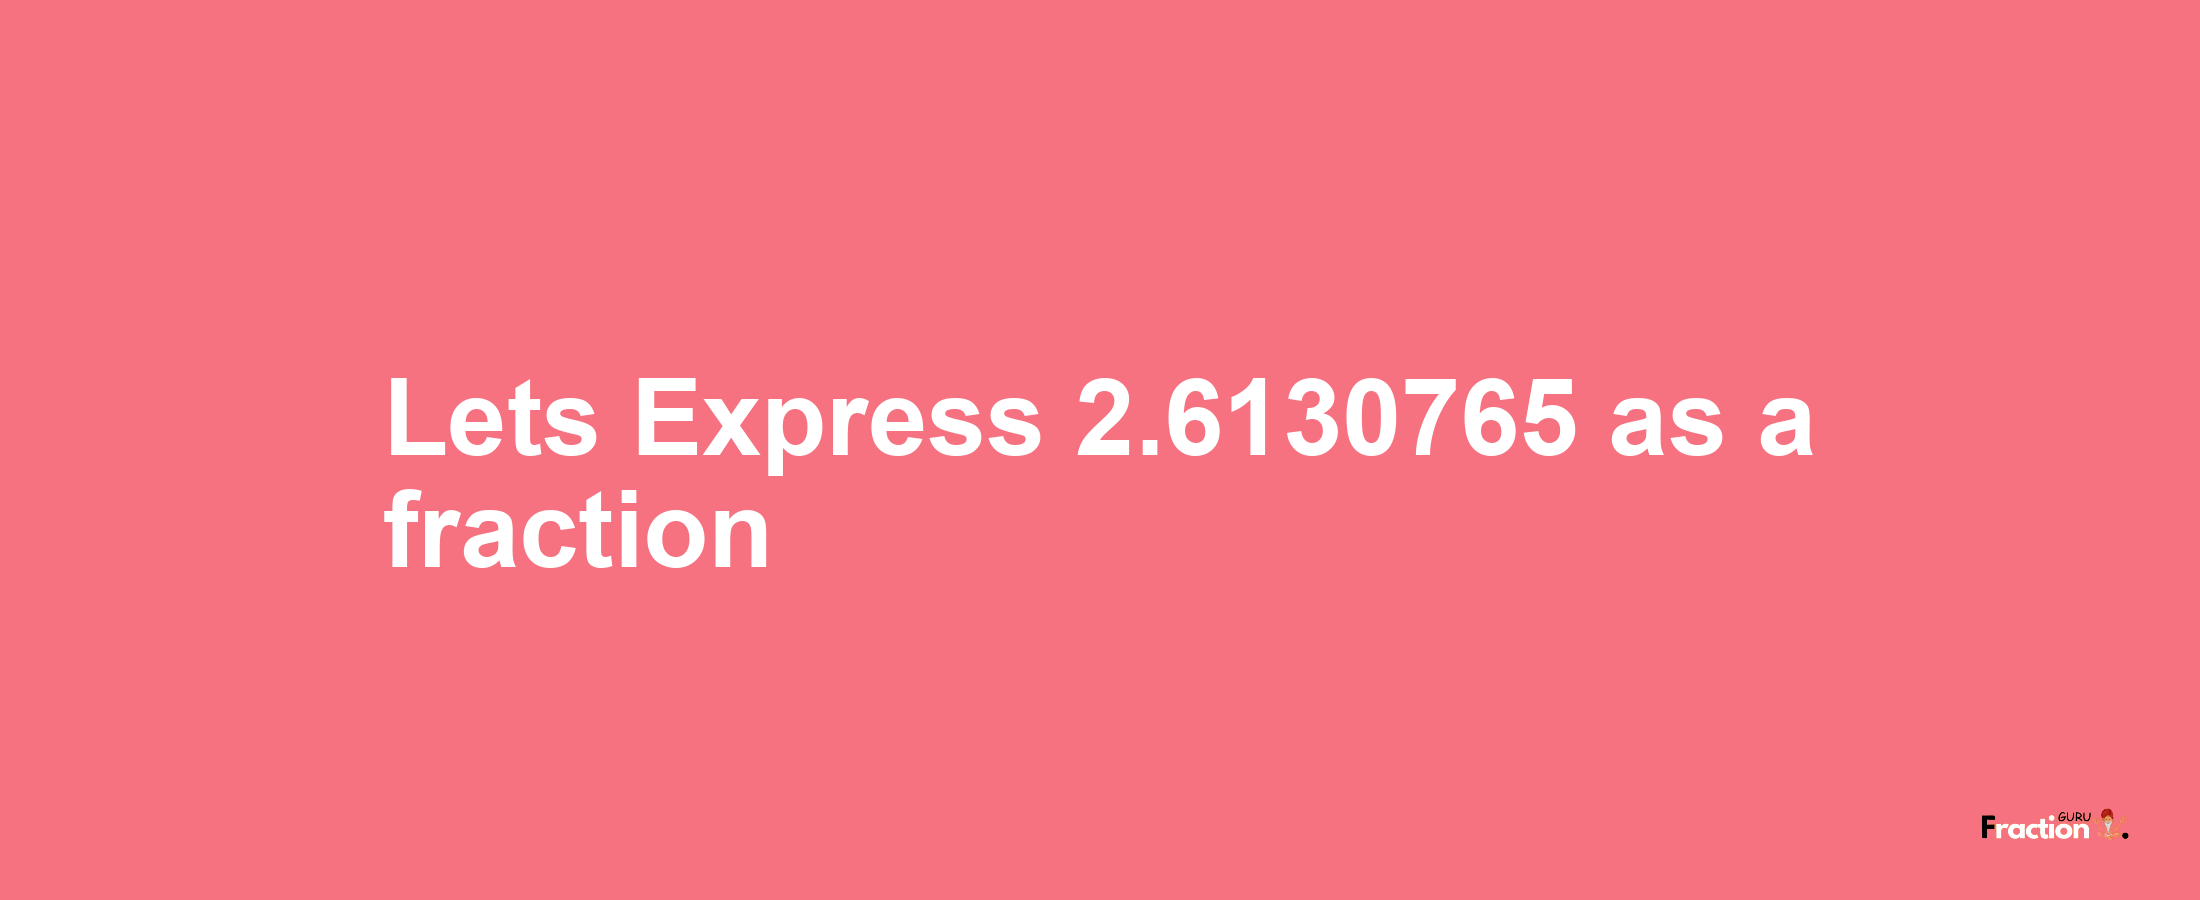 Lets Express 2.6130765 as afraction